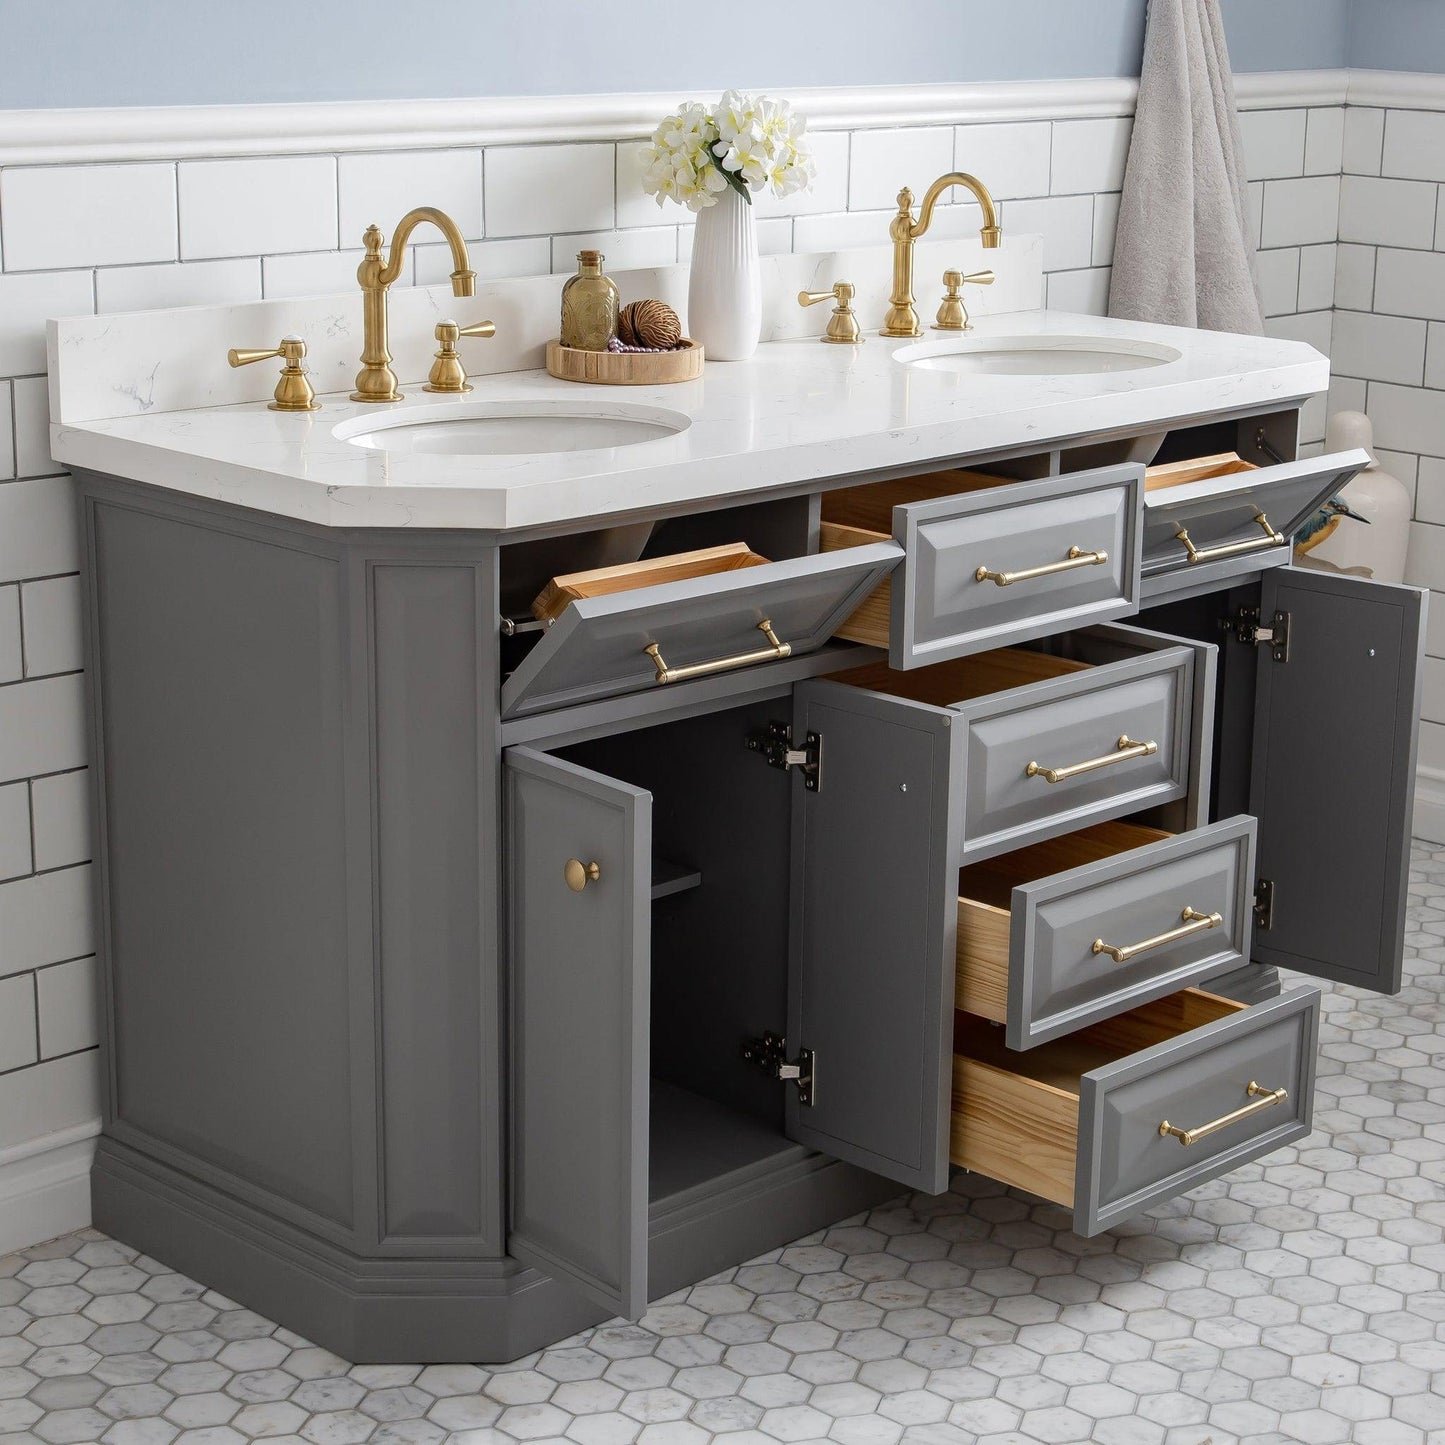 Water Creation Palace 60" Quartz Carrara Cashmere Grey Bathroom Vanity Set With Hardware And F2-0012 Faucets in Satin Gold Finish And Only Mirrors in Chrome Finish